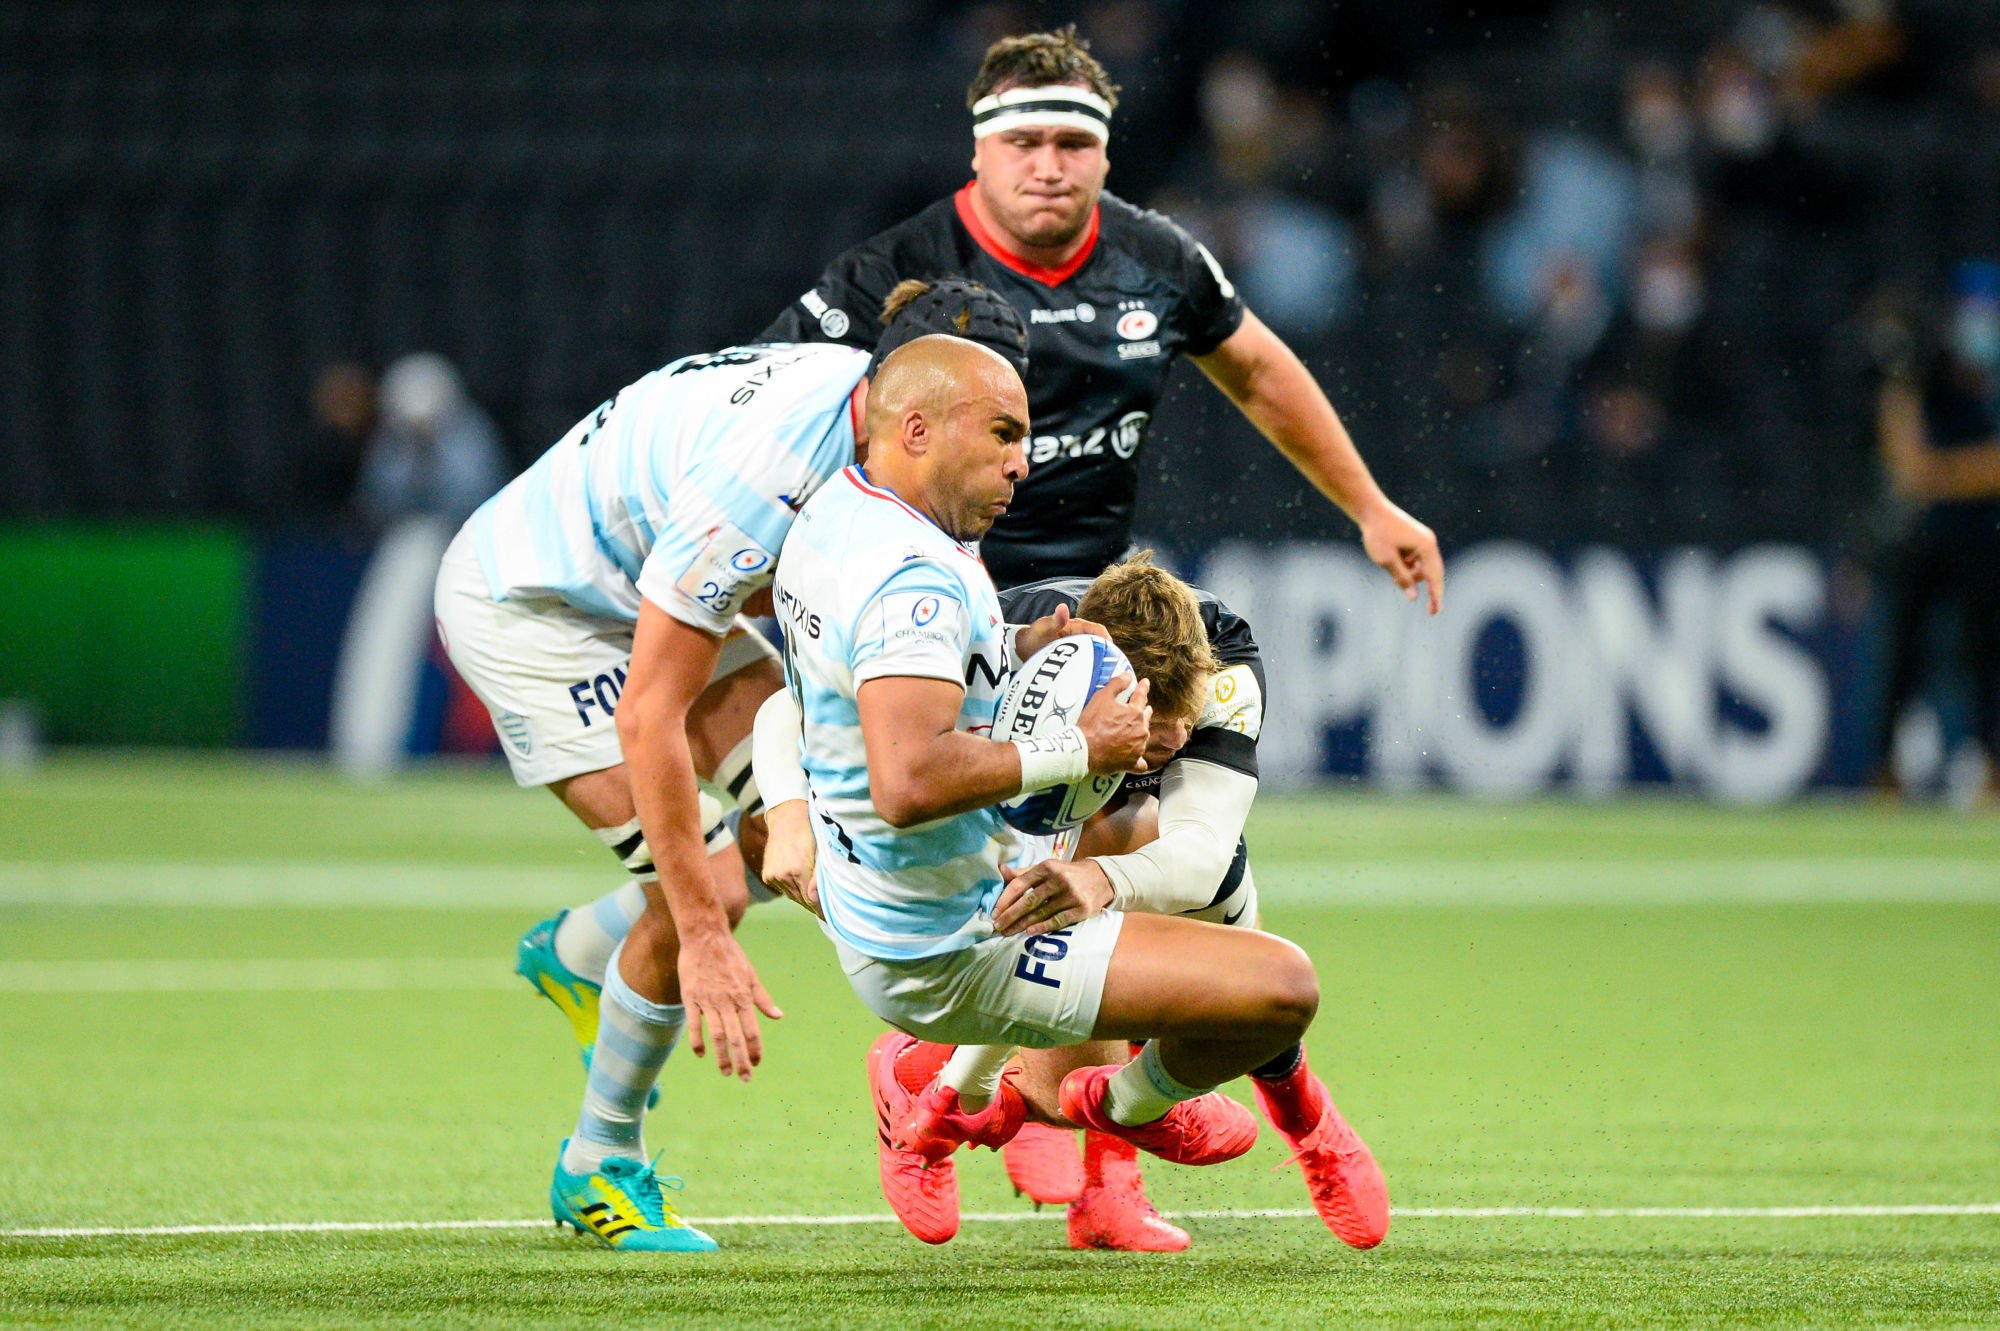 Simon ZEBO of Racing 92 during the Champions Cup Semi-Final match between Racing 92 and Saracens on September 26, 2020 in Nanterre, France. (Photo by Sandra Ruhaut/Icon Sport) - Paris La Defense Arena - Paris (France)